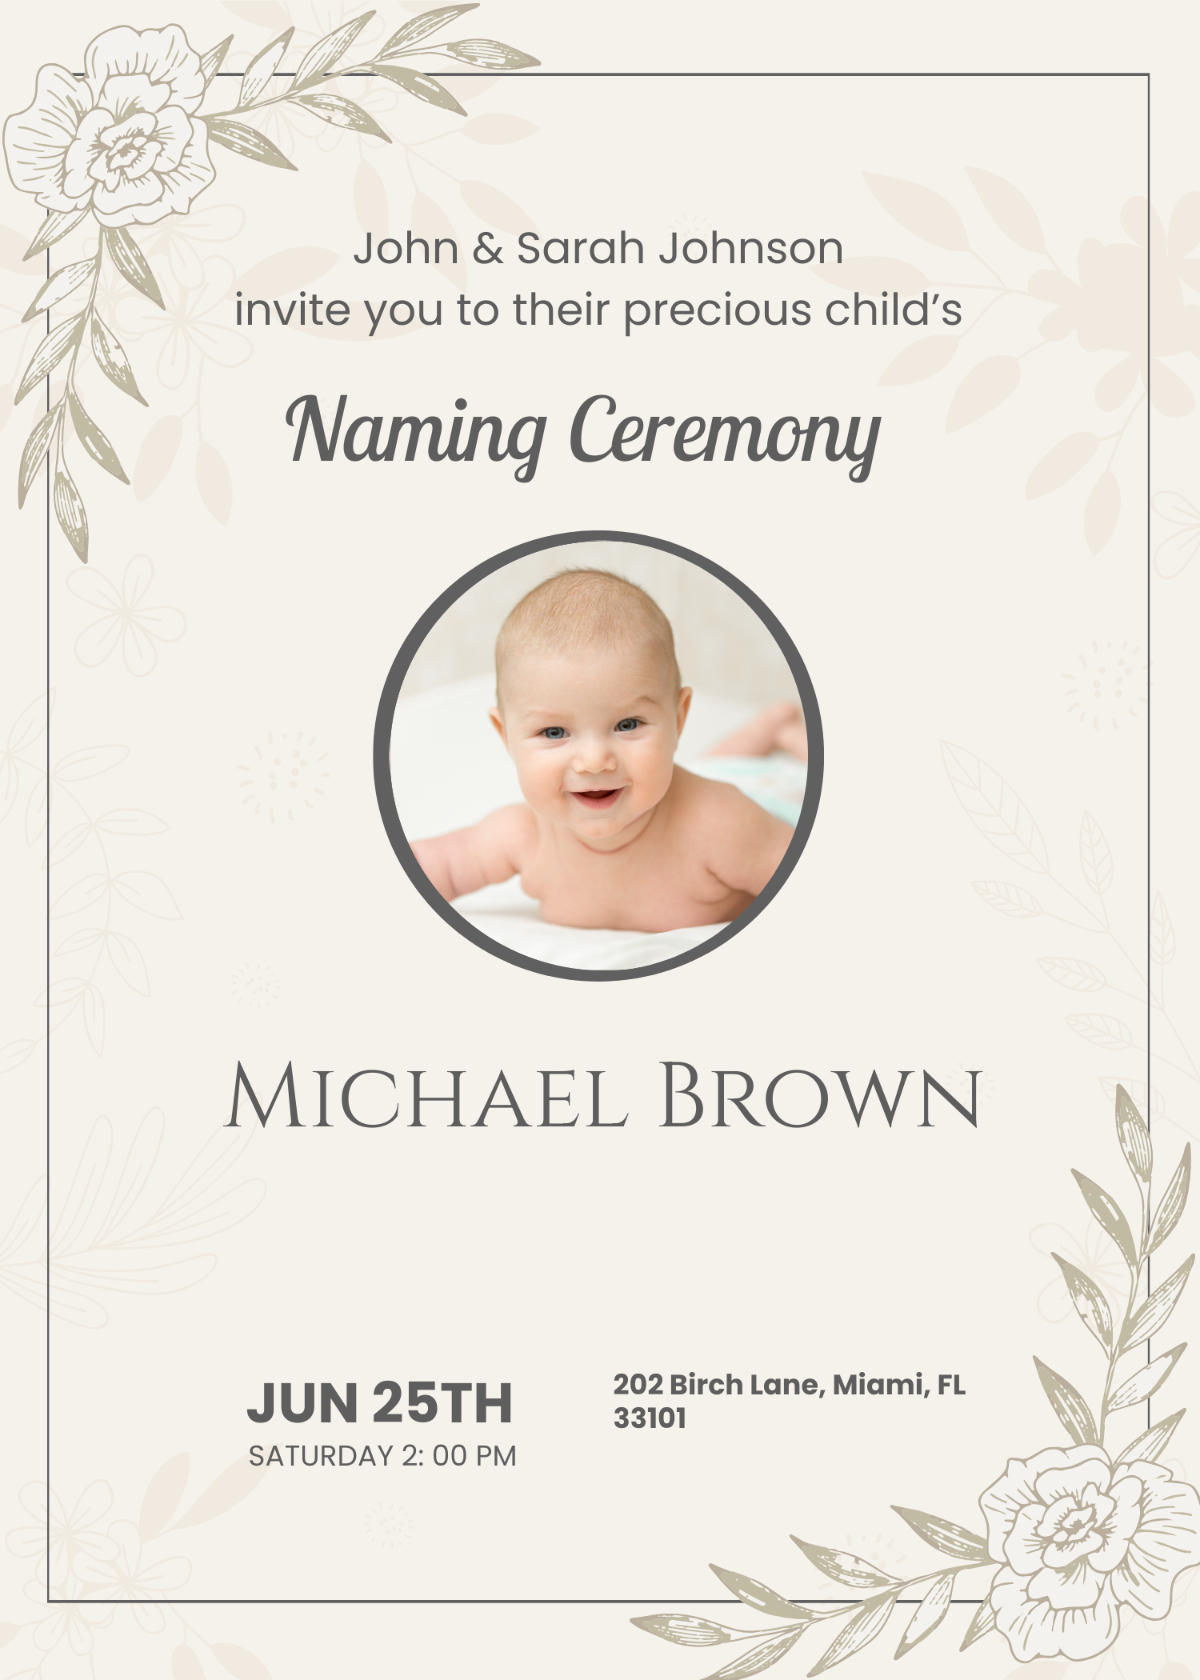 Naming Ceremony Invitation With Parents Names